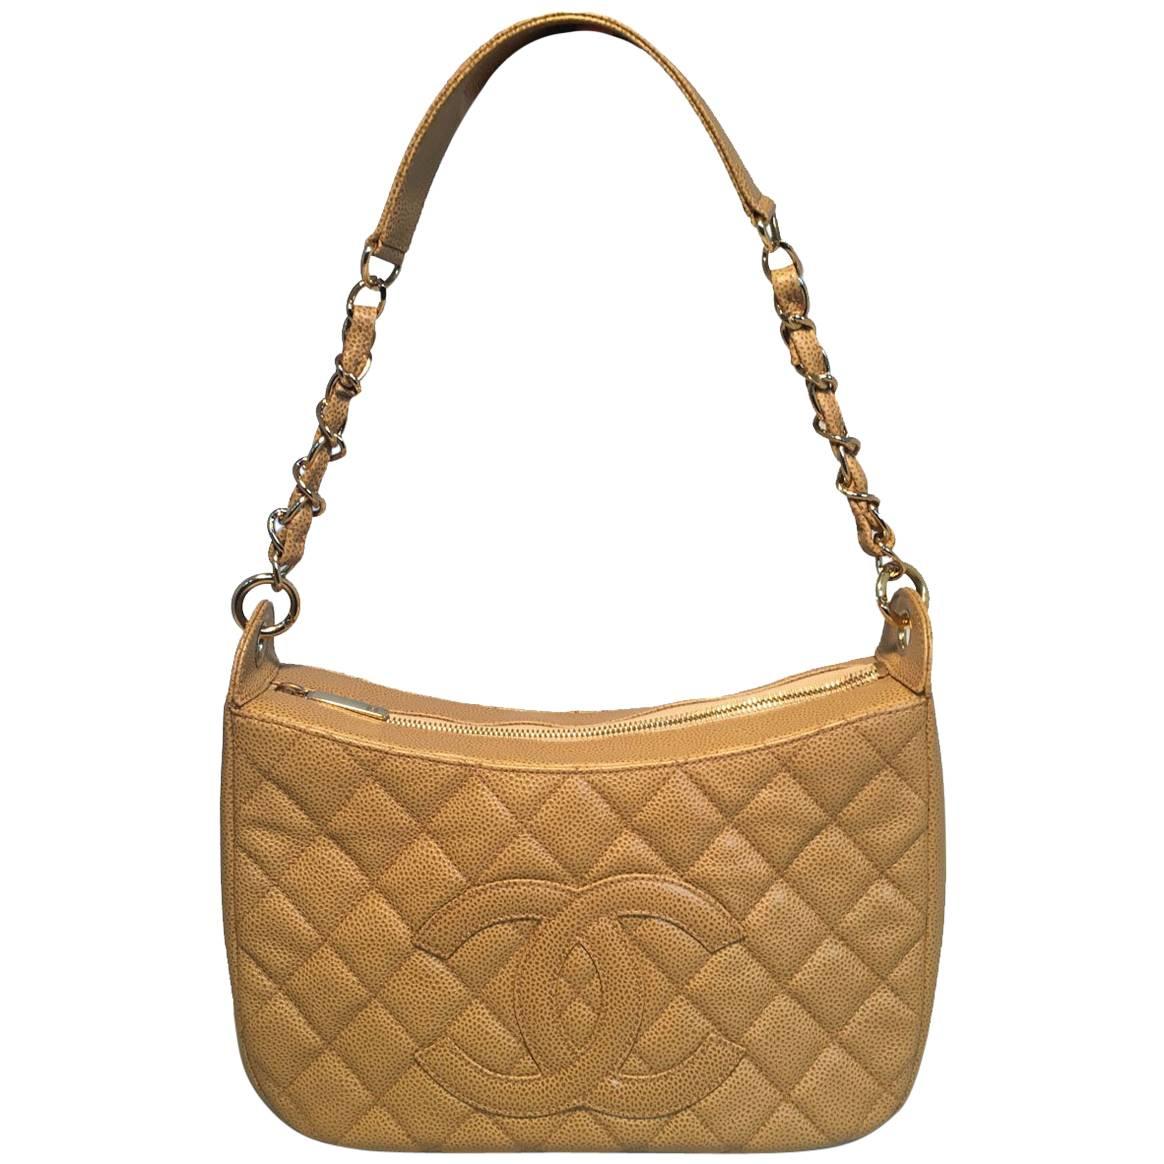 Chanel Tan Quilted Caviar Leather Shoulder Bag